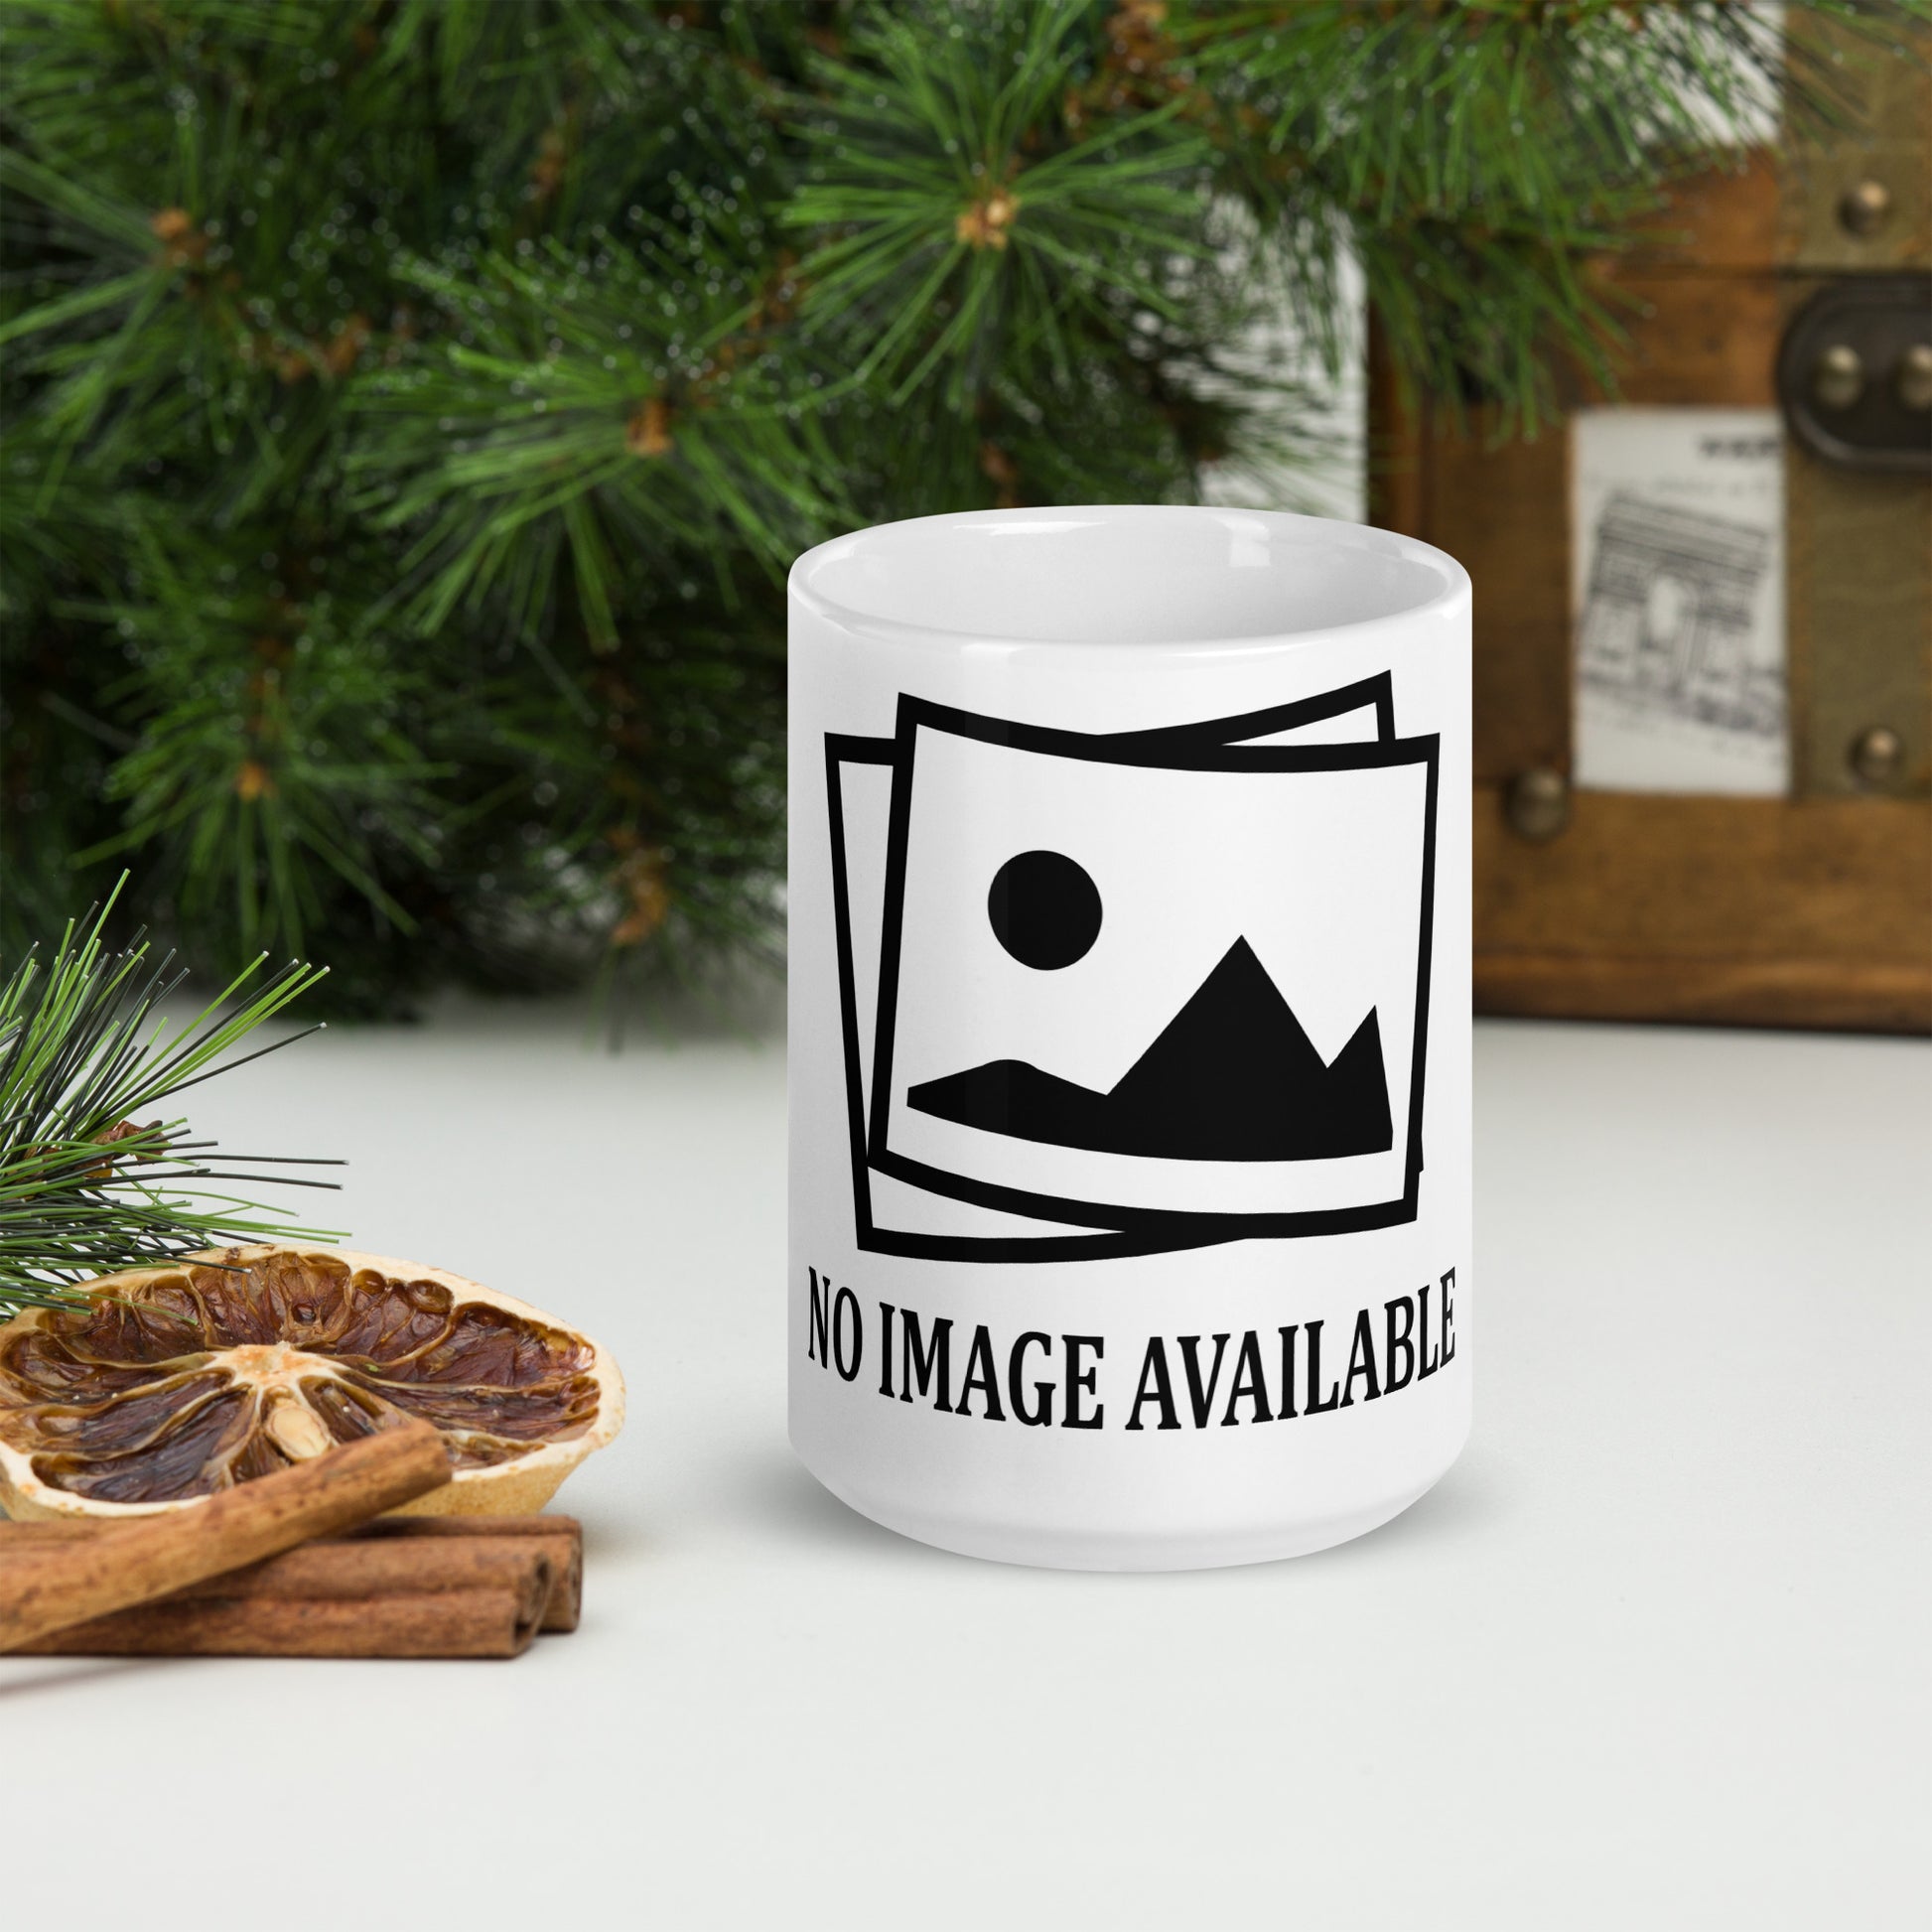 white mug with print and text "no image available"